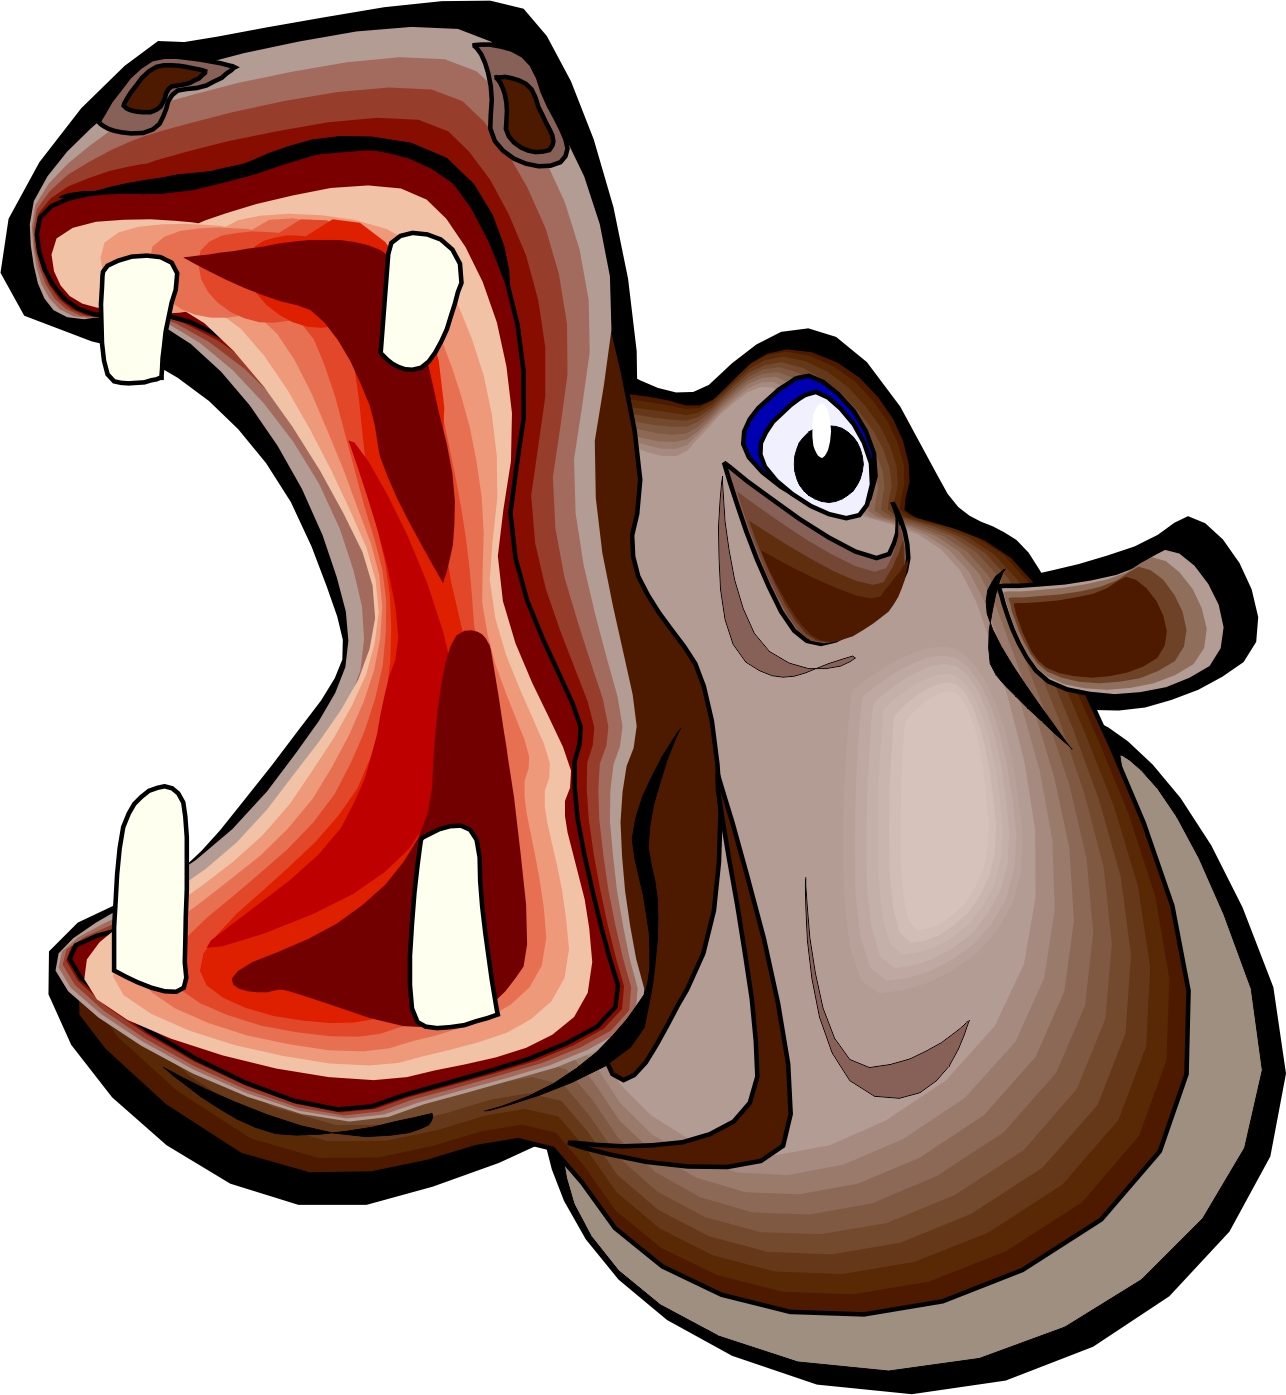 Cartoon Hippo Head Images & Pictures - Becuo